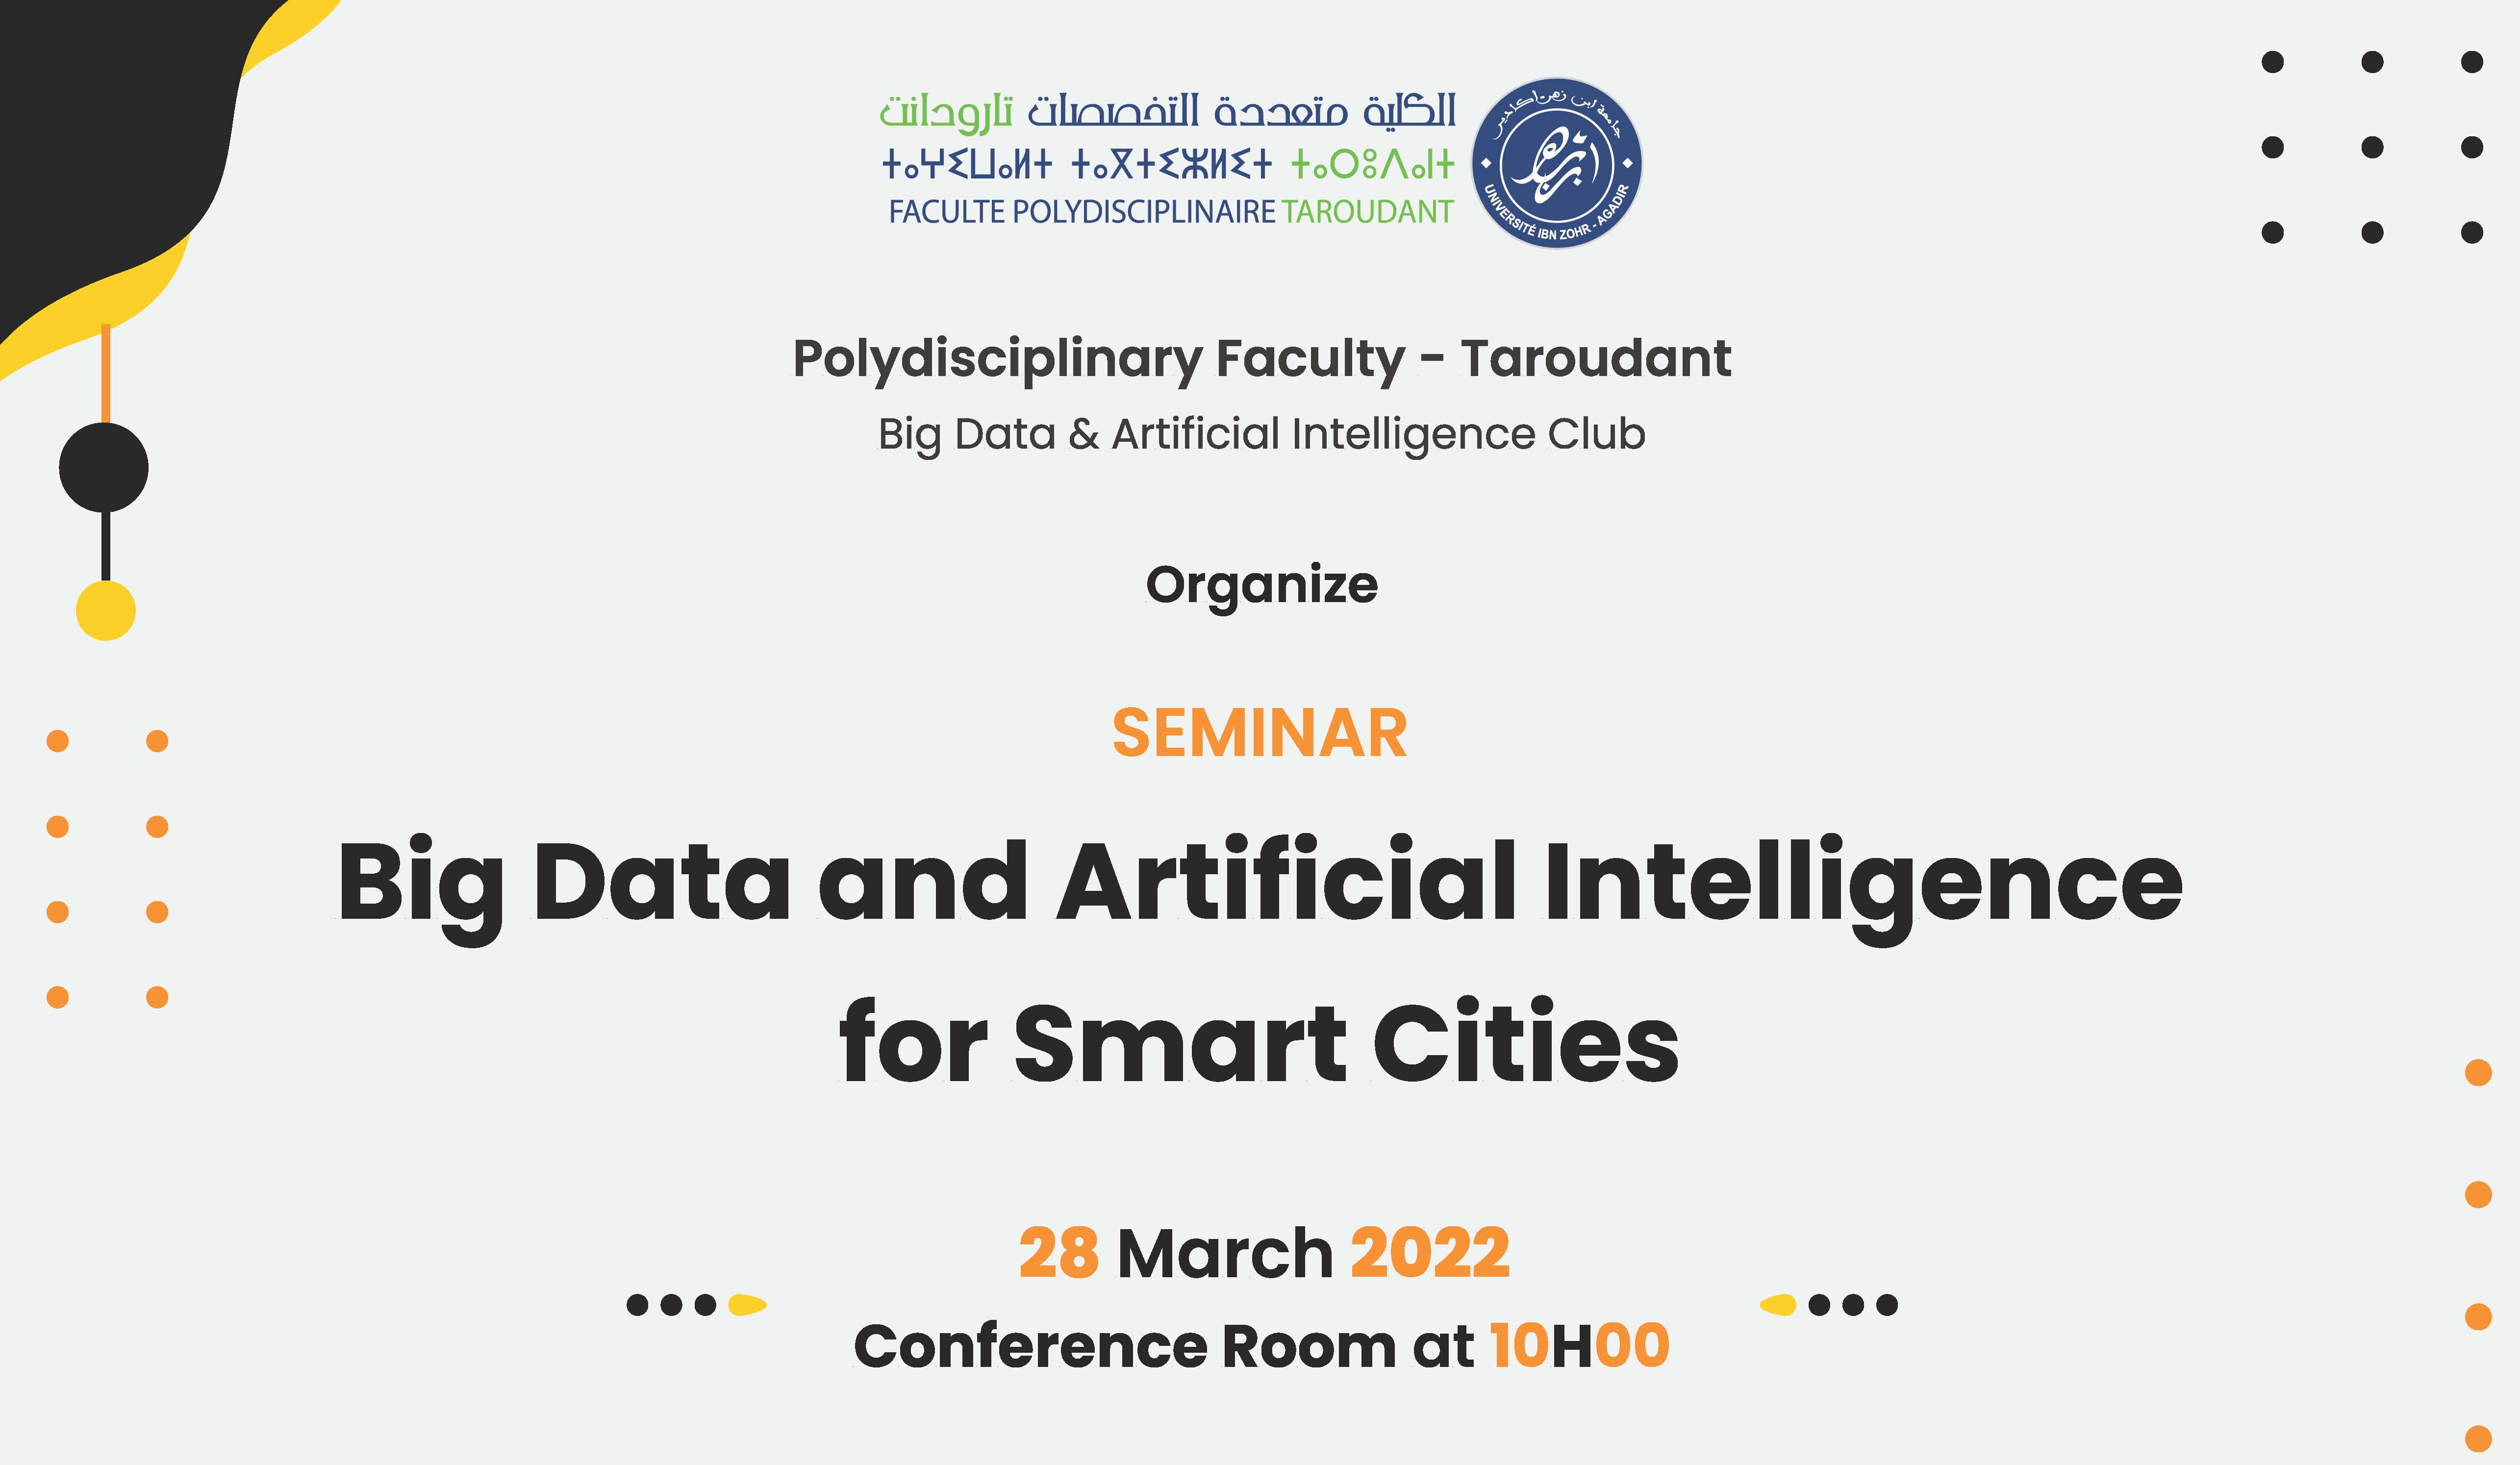 SEMINAR Big Data and Artificial Intelligence for Smart Cities